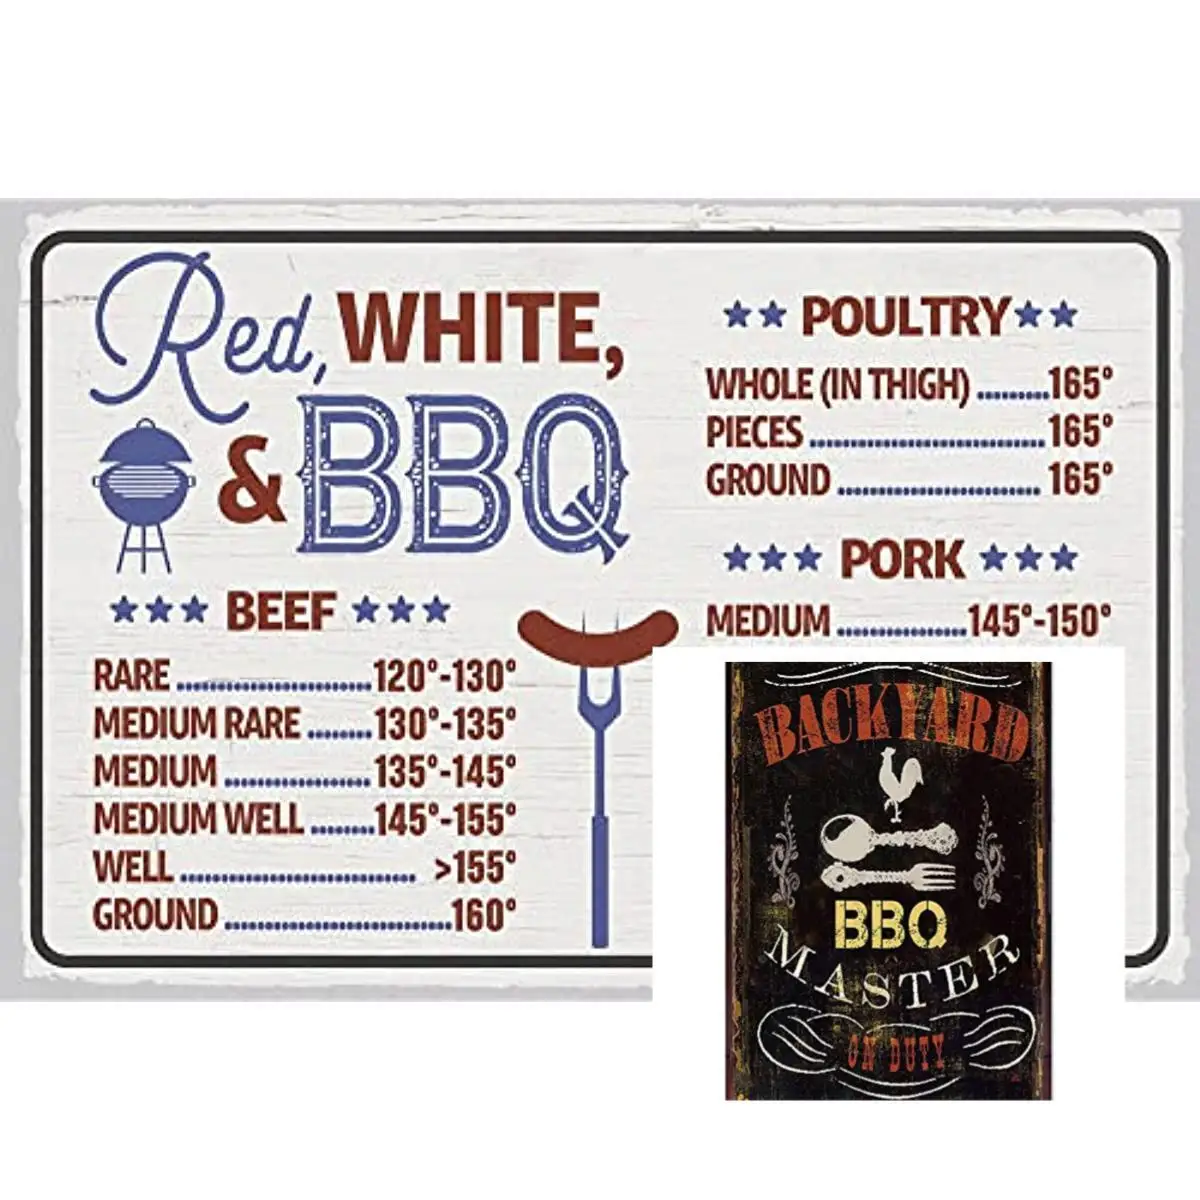 

Backyard Courtyard BBQ Master Metal Tin Sign, Vintage Plate Plaque，Enjoy a Happy Time With Friends，BBQ Metal Decorative Panel